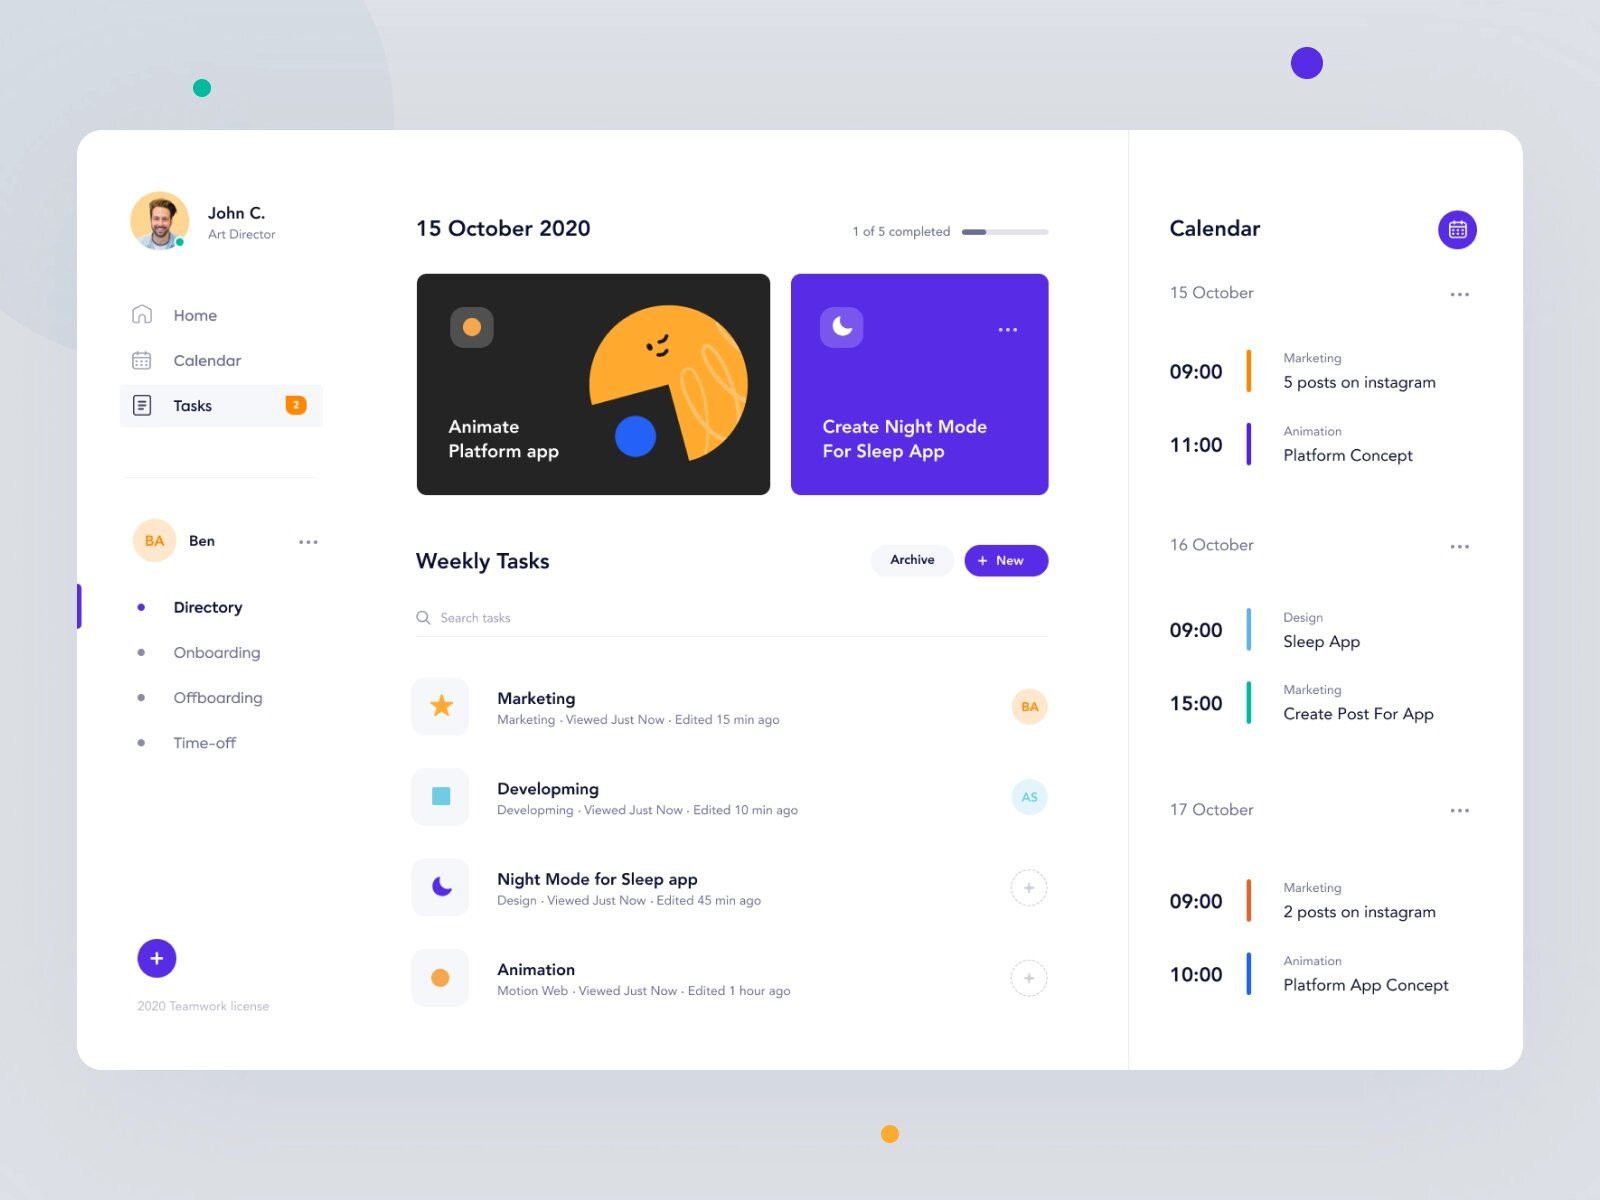 When building task management app or web-product, it’s important to pay attention to security of your task &amp; project management platform (*image by [Afterglow](https://dribbble.com/Afterglow-studio){ rel="nofollow" target="_blank" .default-md}*)